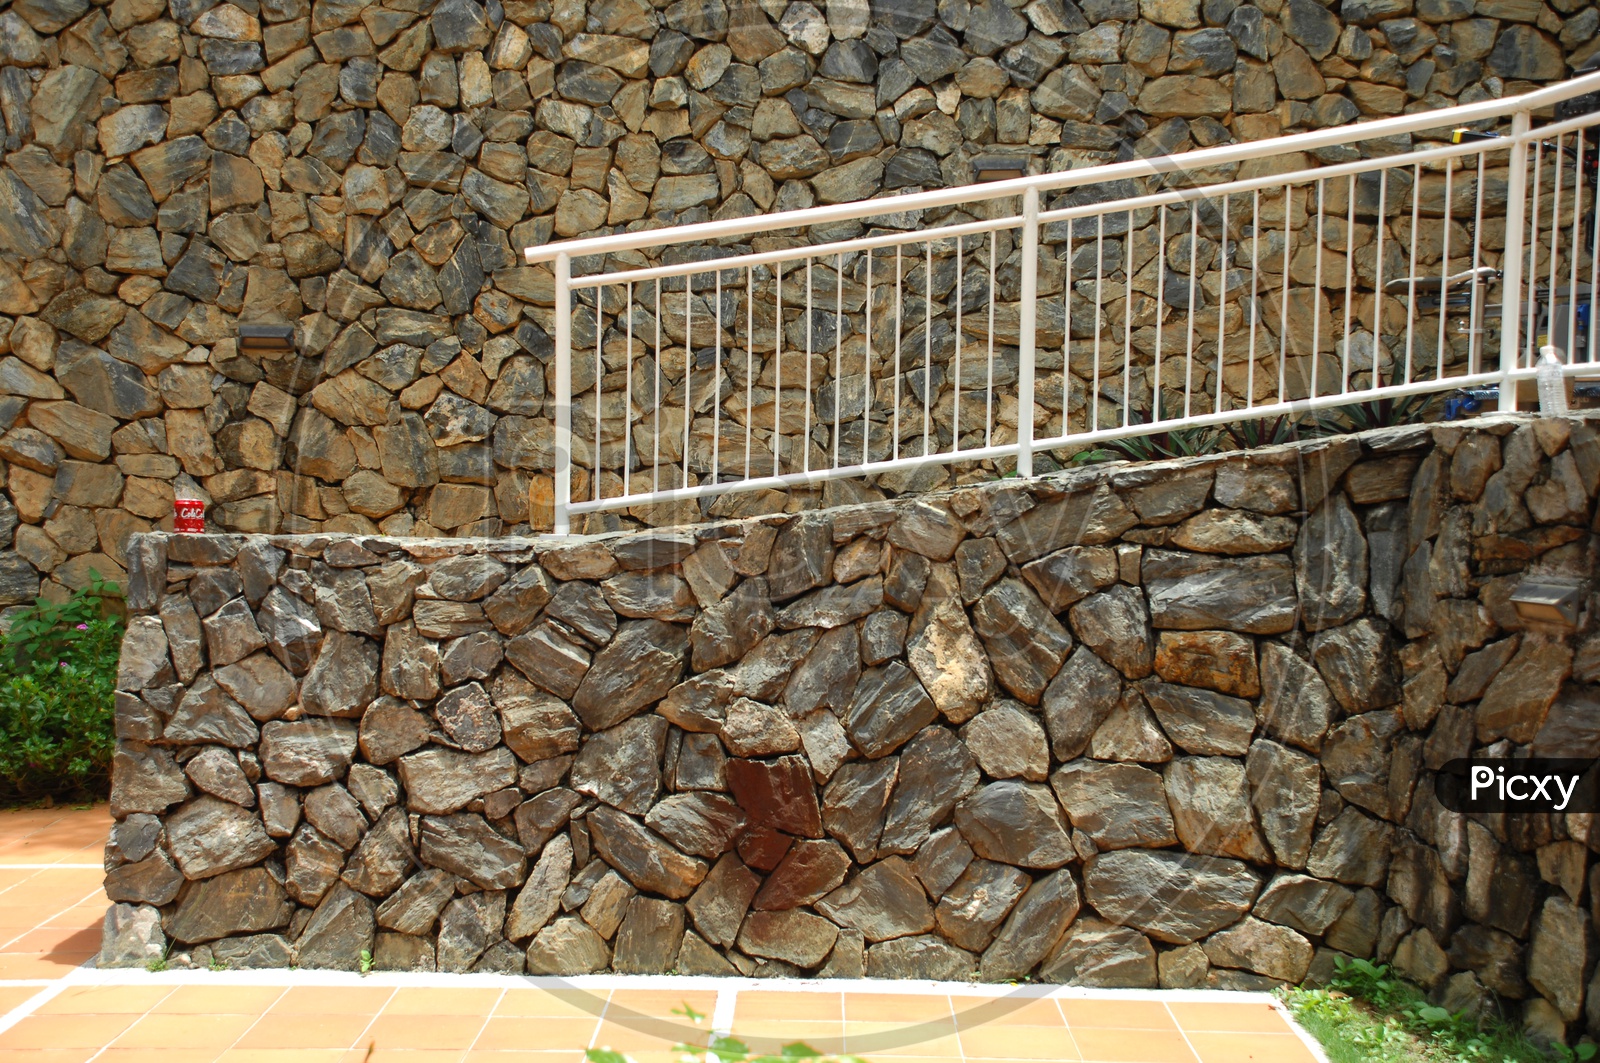 A wall build with different shapes of rocks